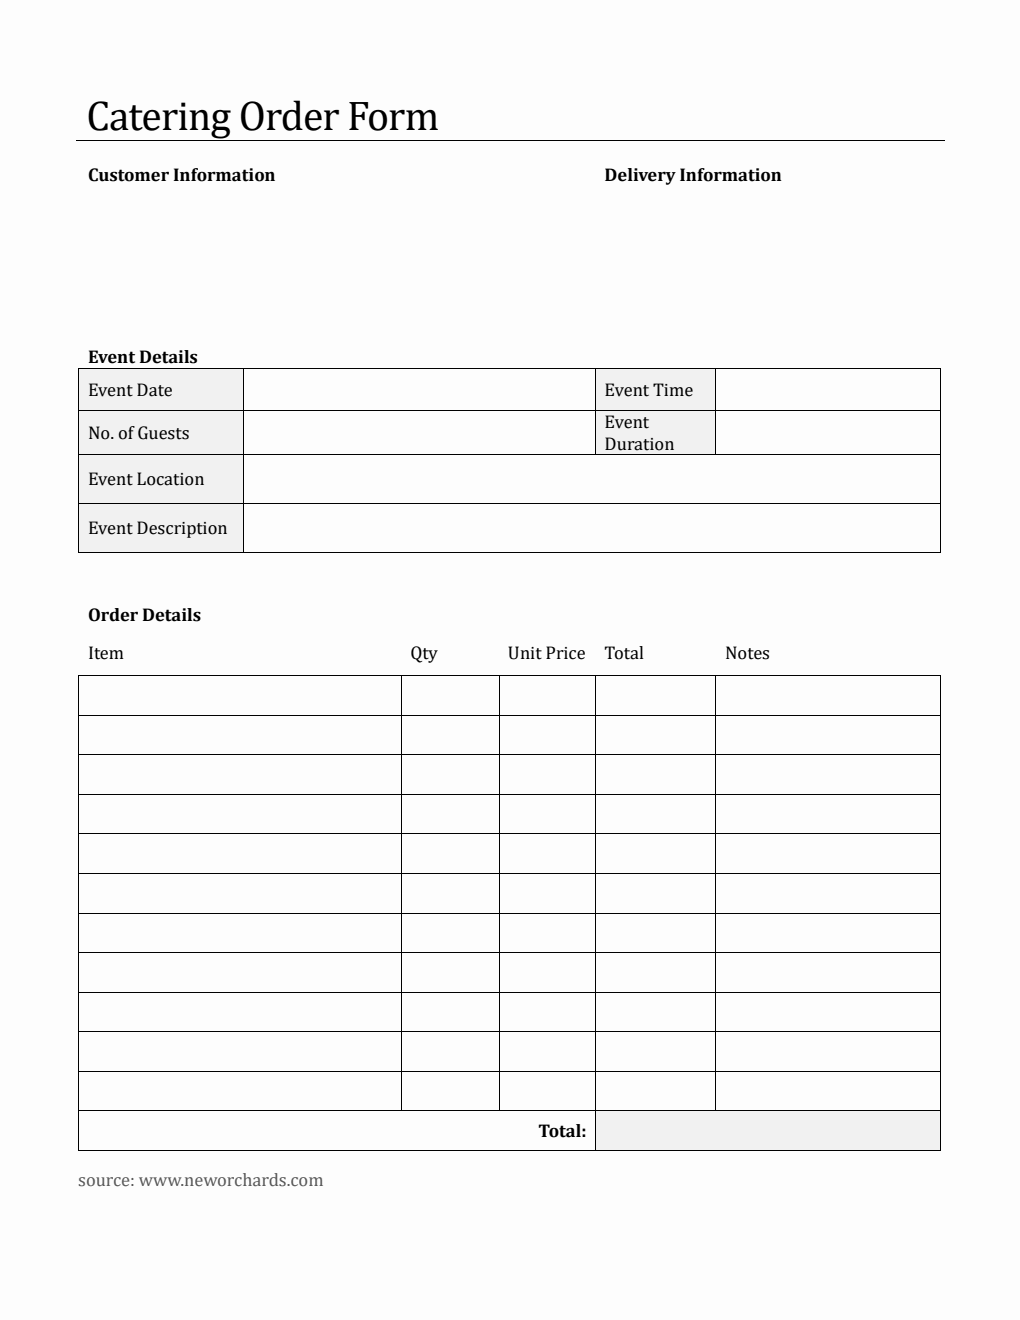 Editable Catering Order Form Template in PDF